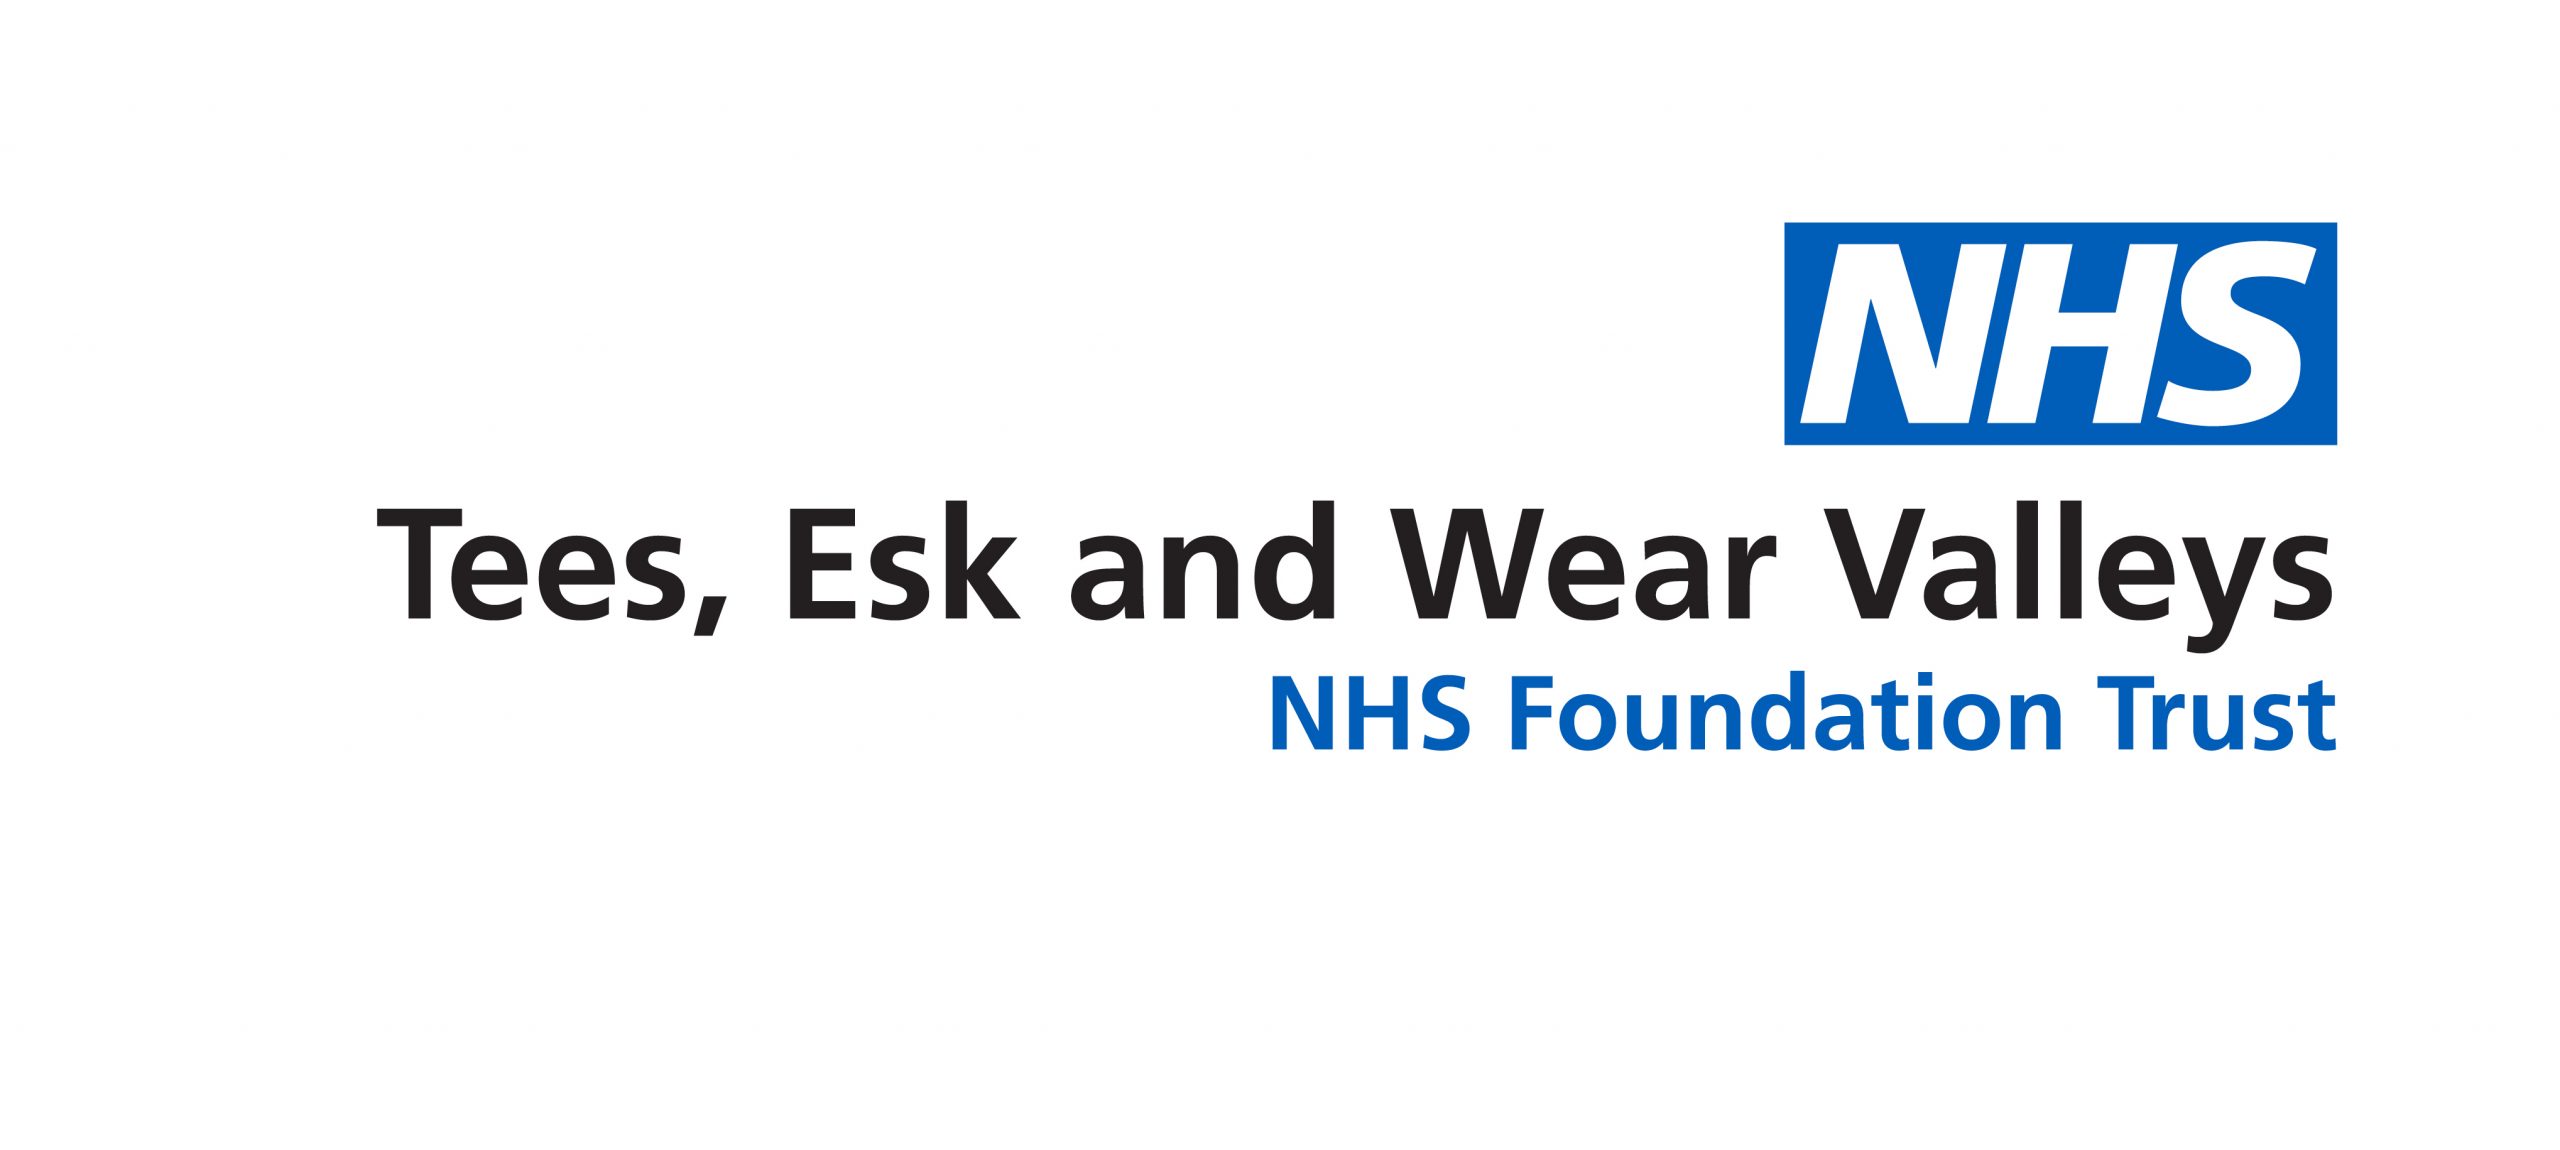 Scabies - Tees Esk and Wear Valley NHS Foundation Trust